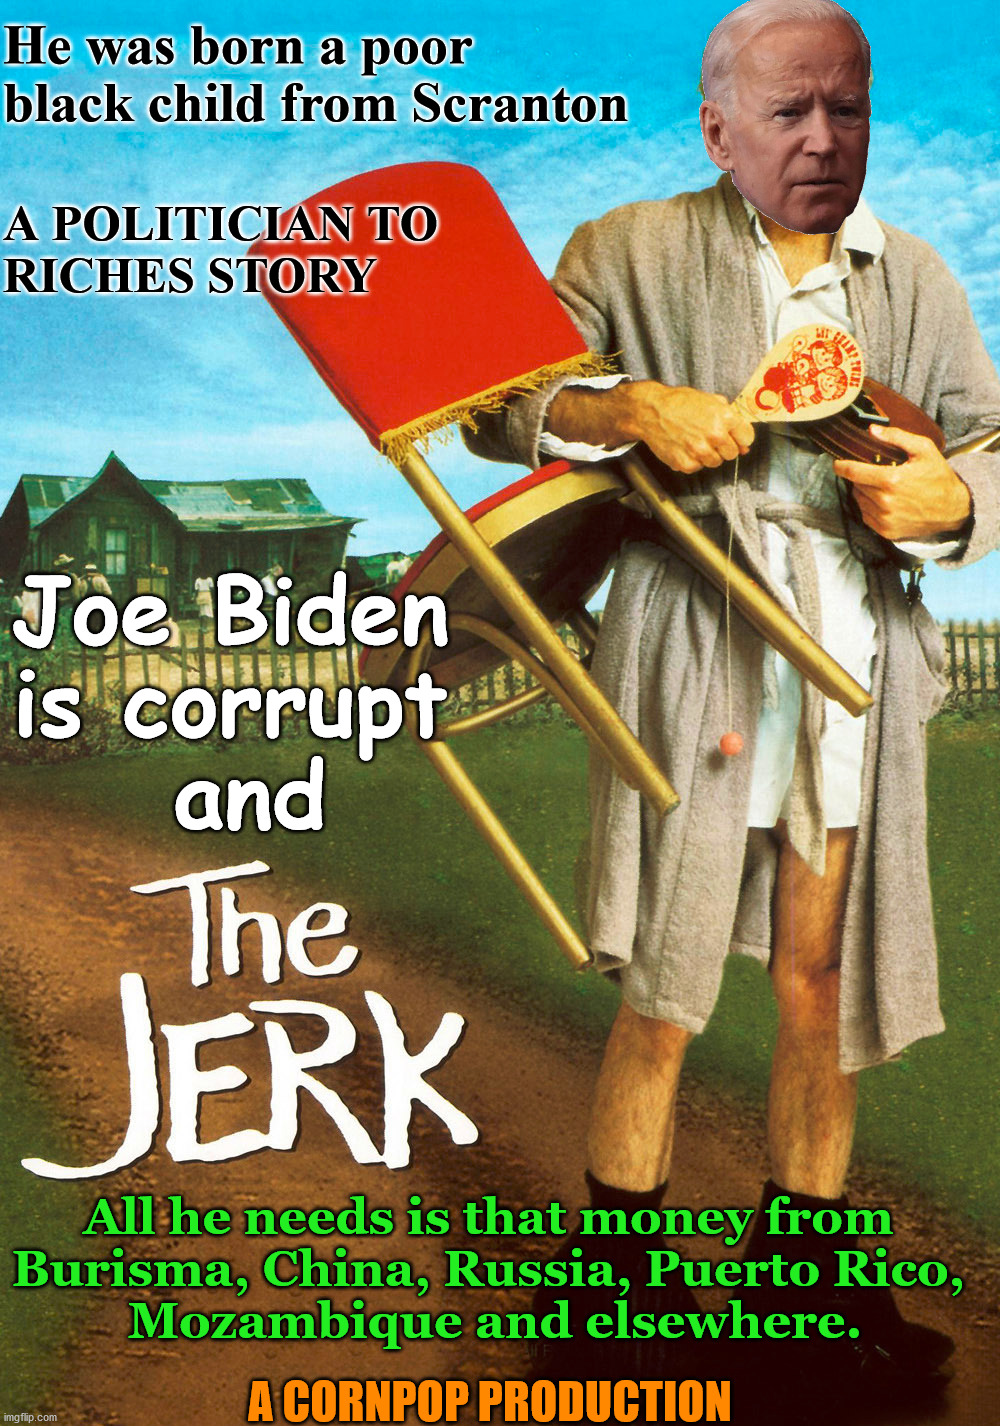 Remake of the 1979 movie "The Jerk" | He was born a poor black child from Scranton; A POLITICIAN TO 
RICHES STORY; Joe Biden 
is corrupt 
and; All he needs is that money from 
Burisma, China, Russia, Puerto Rico, 
Mozambique and elsewhere. A CORNPOP PRODUCTION | image tagged in joe biden,the jerk,political meme | made w/ Imgflip meme maker